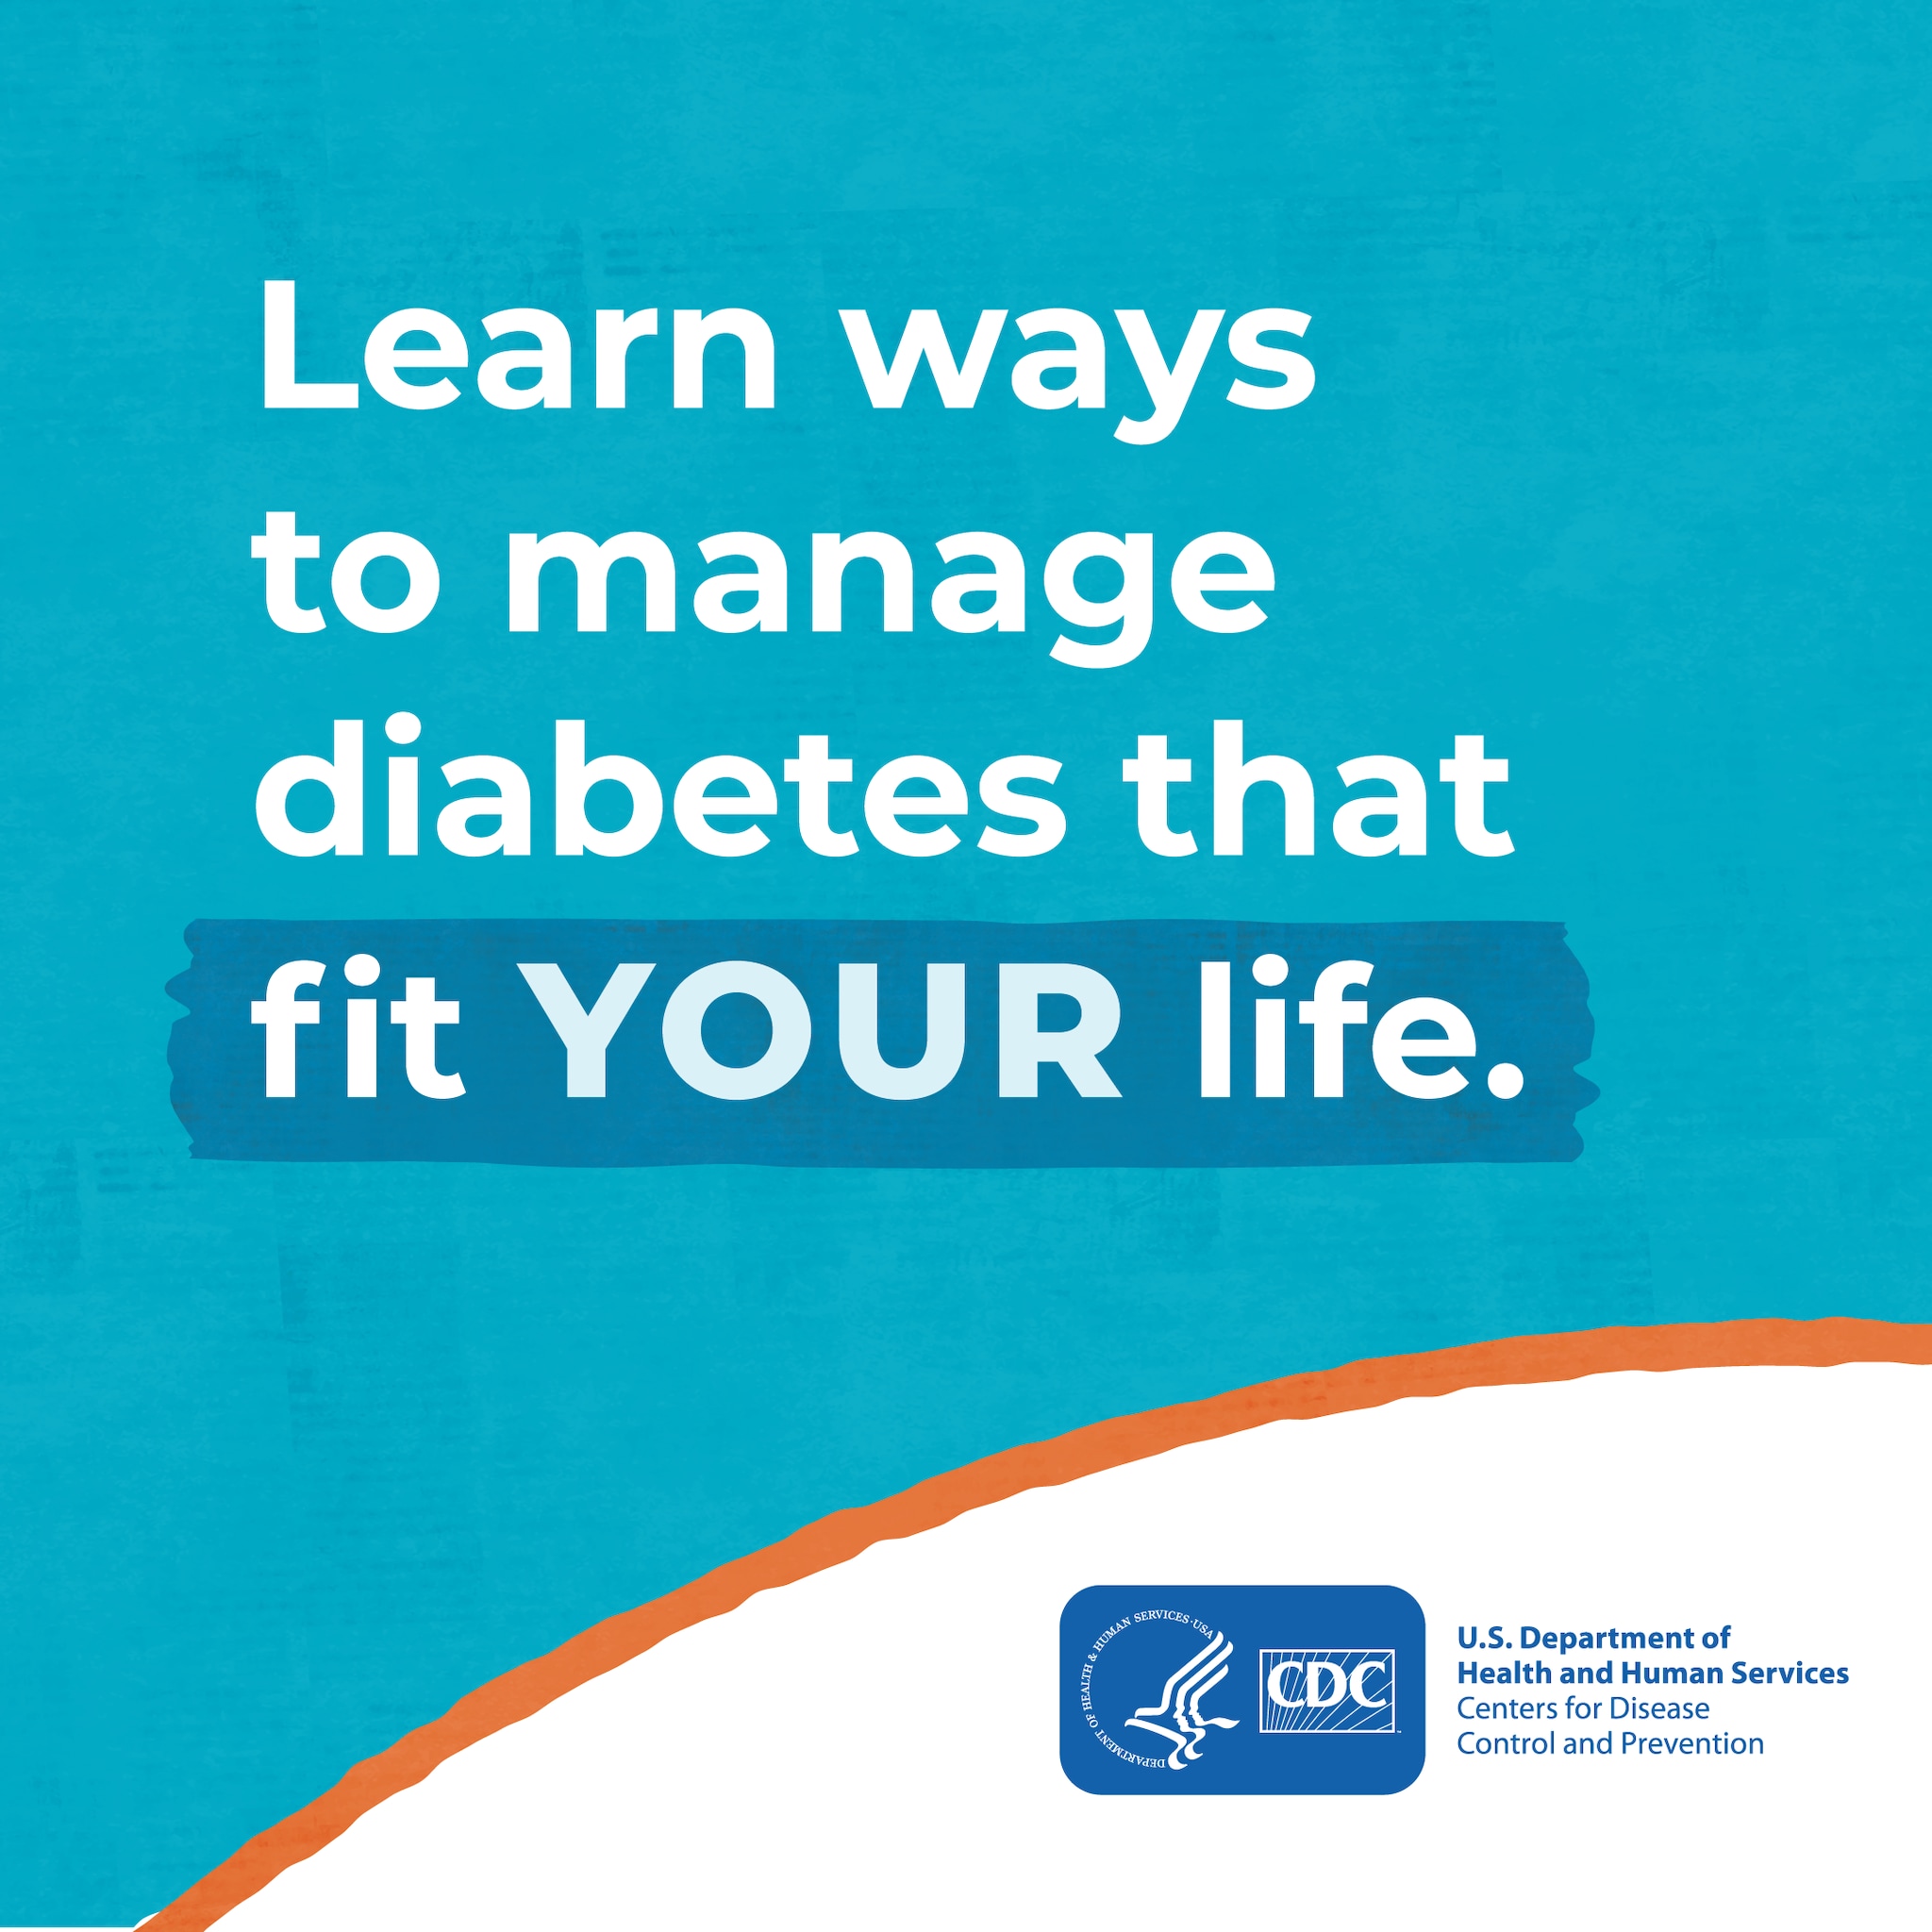 Learn ways to manage diabetes that fit your life. CDC logo.